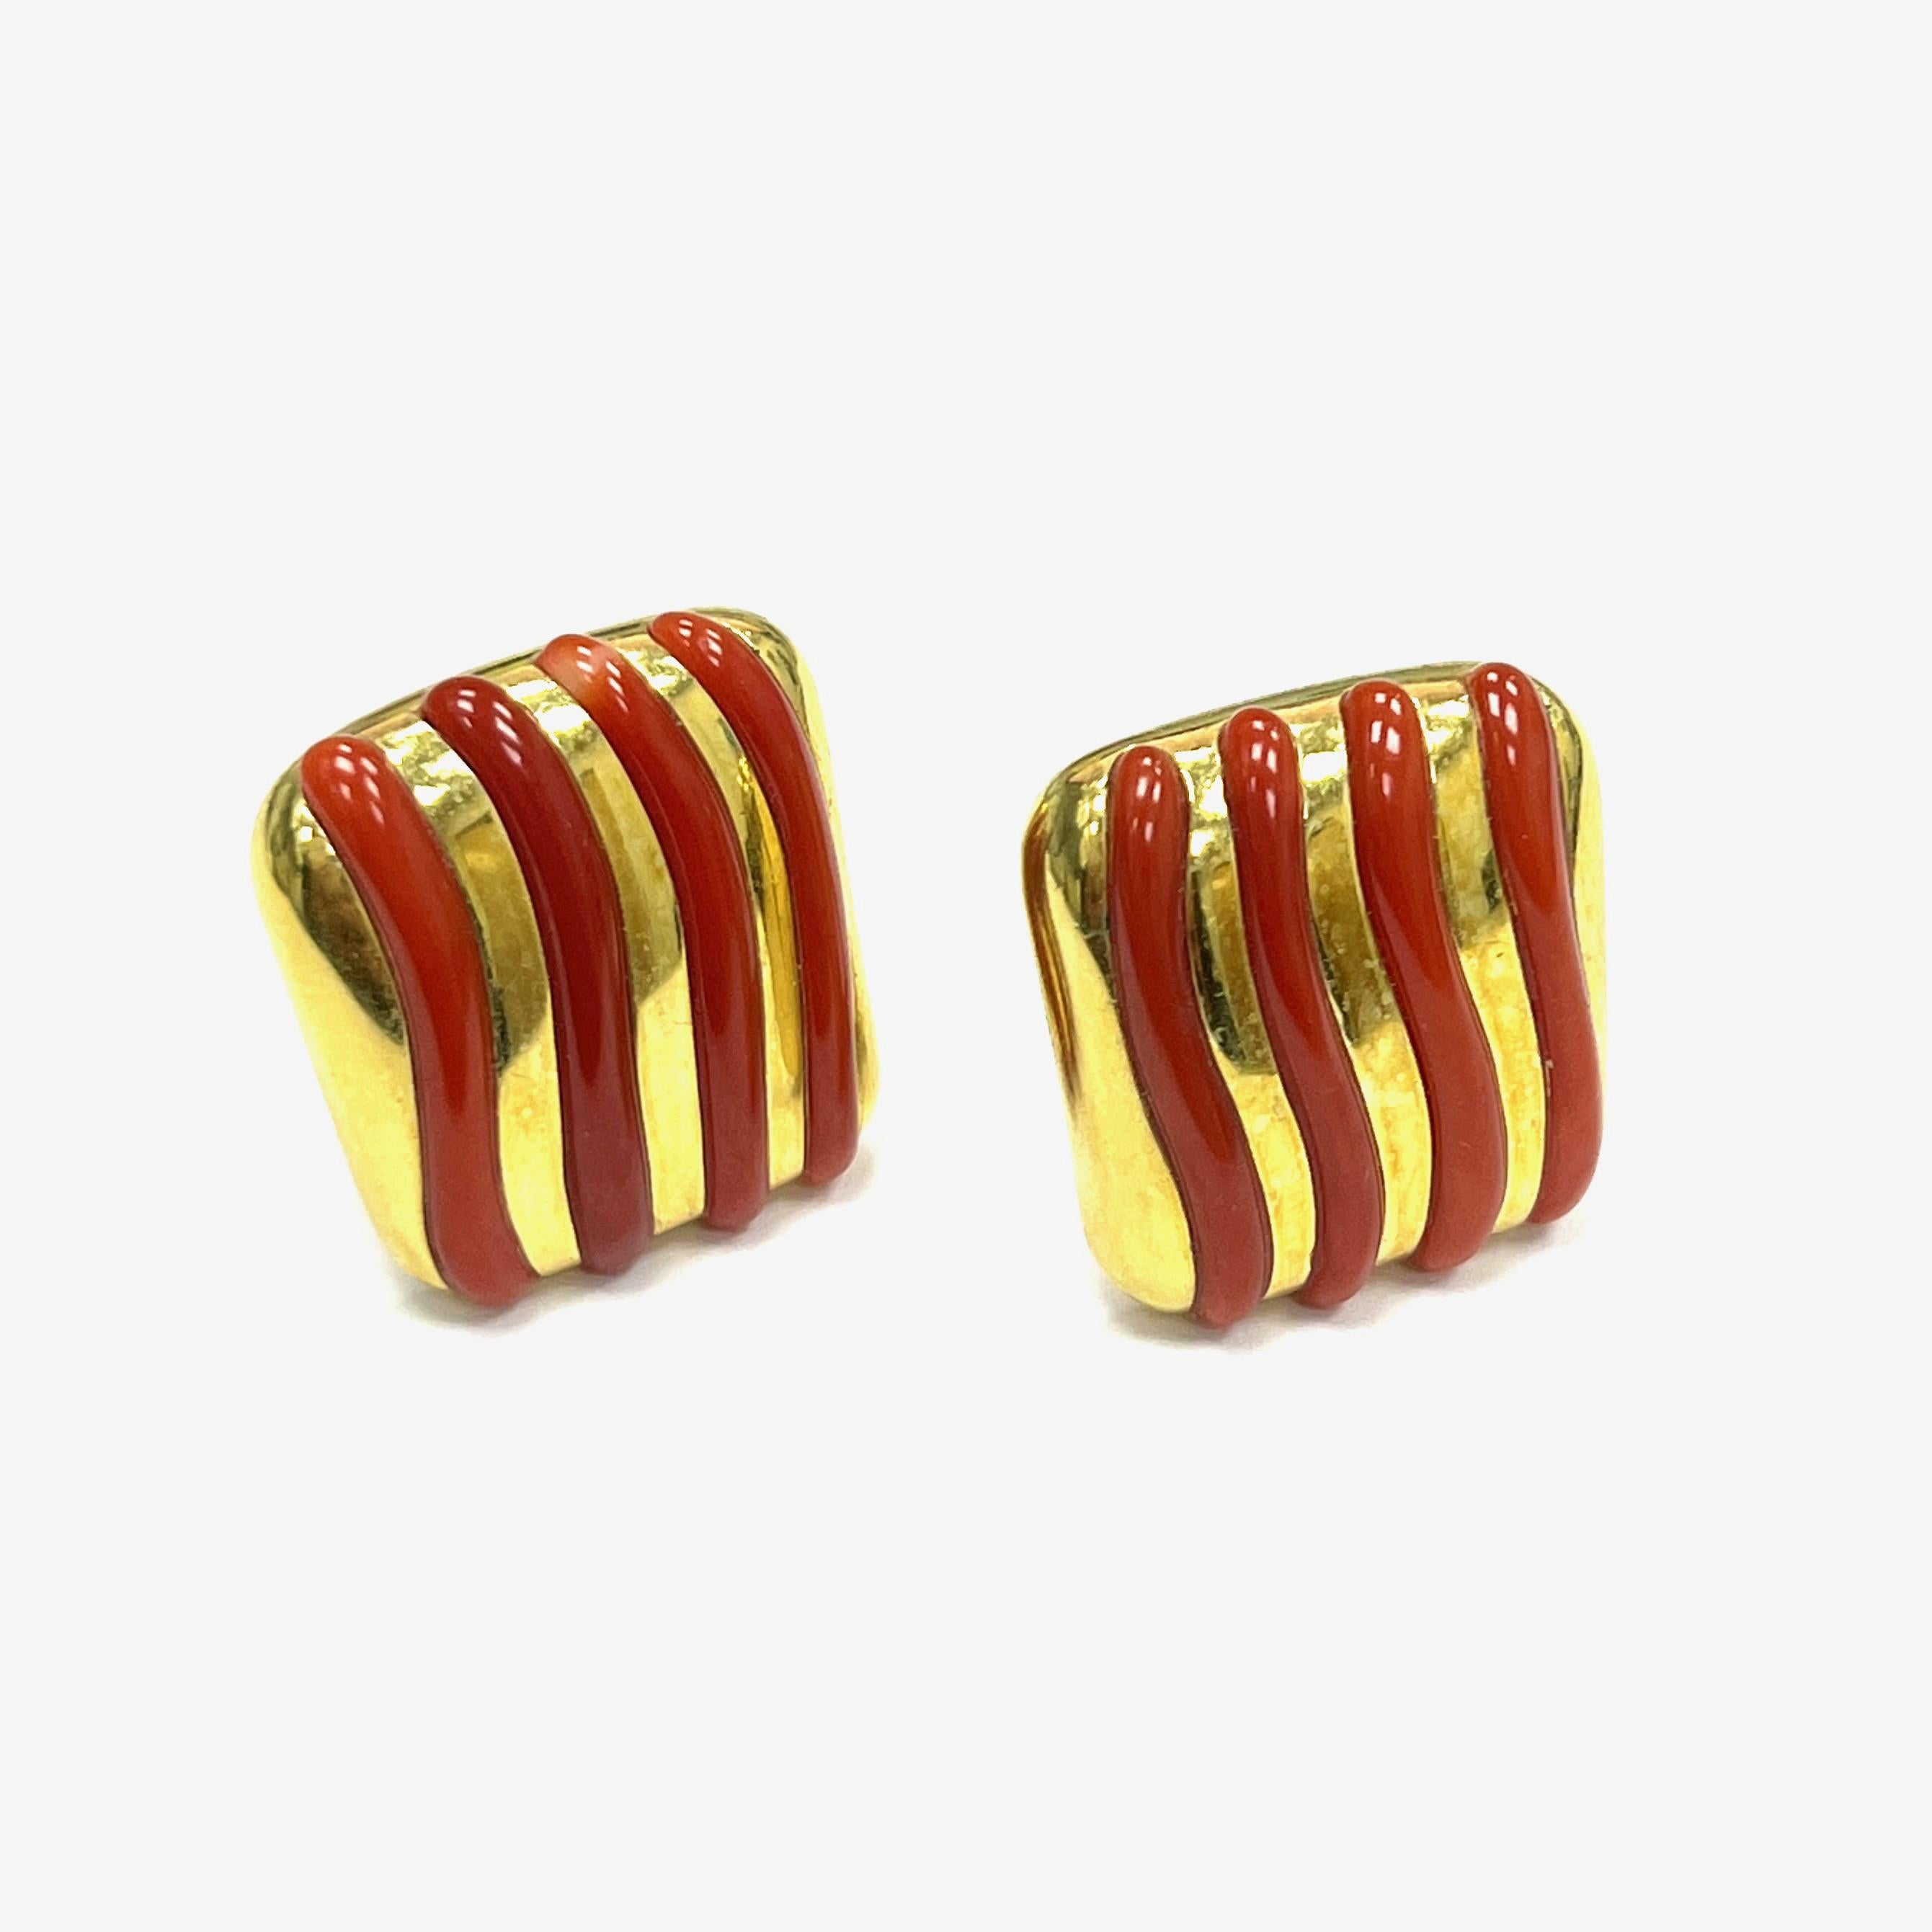 Contemporary Angela Cummings Agate Carnelian Yellow Gold Ear Clips, 1989 For Sale